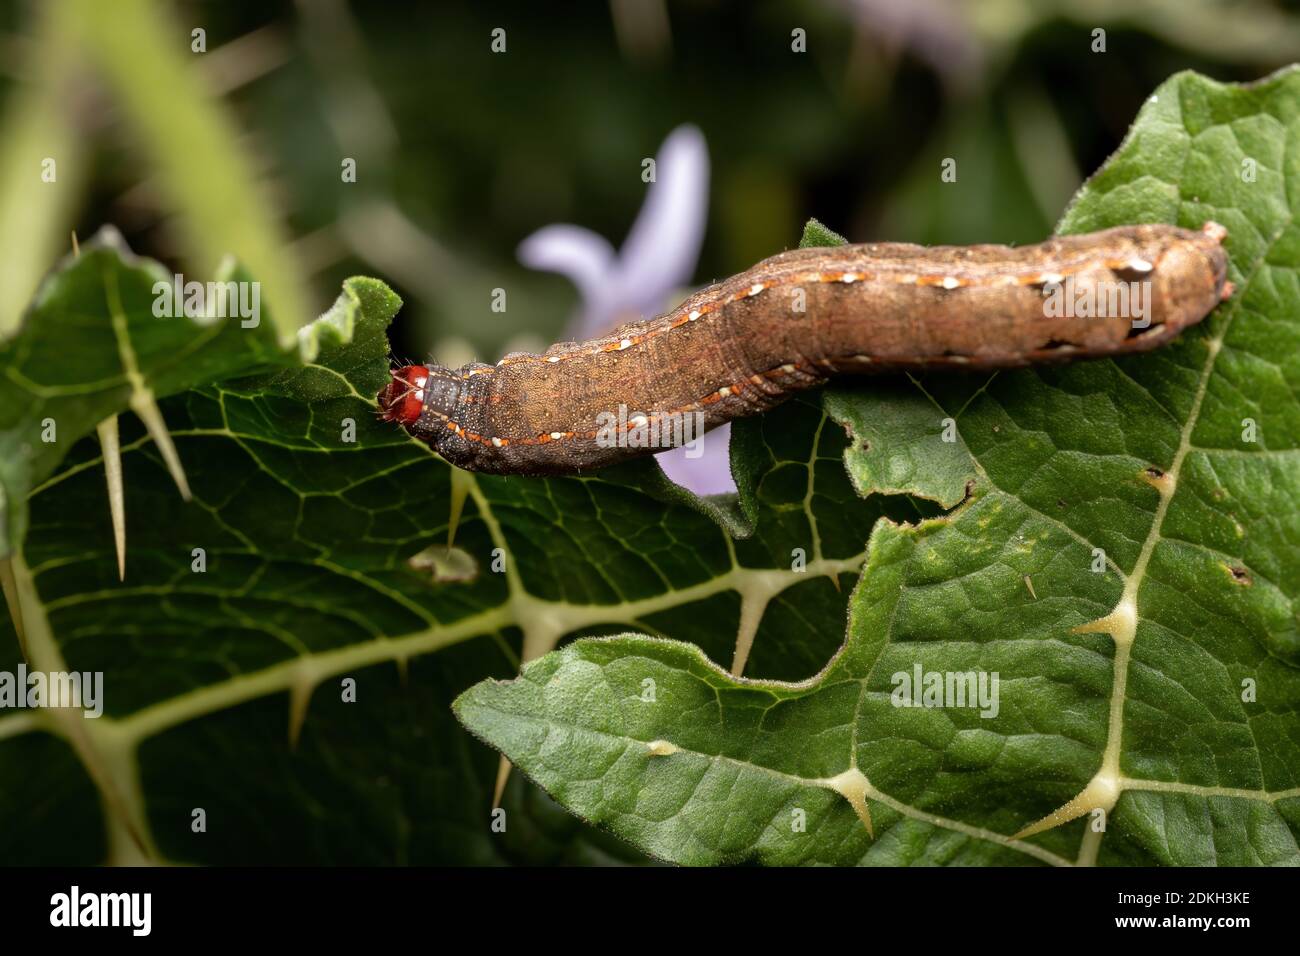 Caterpillar of the species Spodoptera cosmioides eating a leaf from a plant of the genus solanum Stock Photo